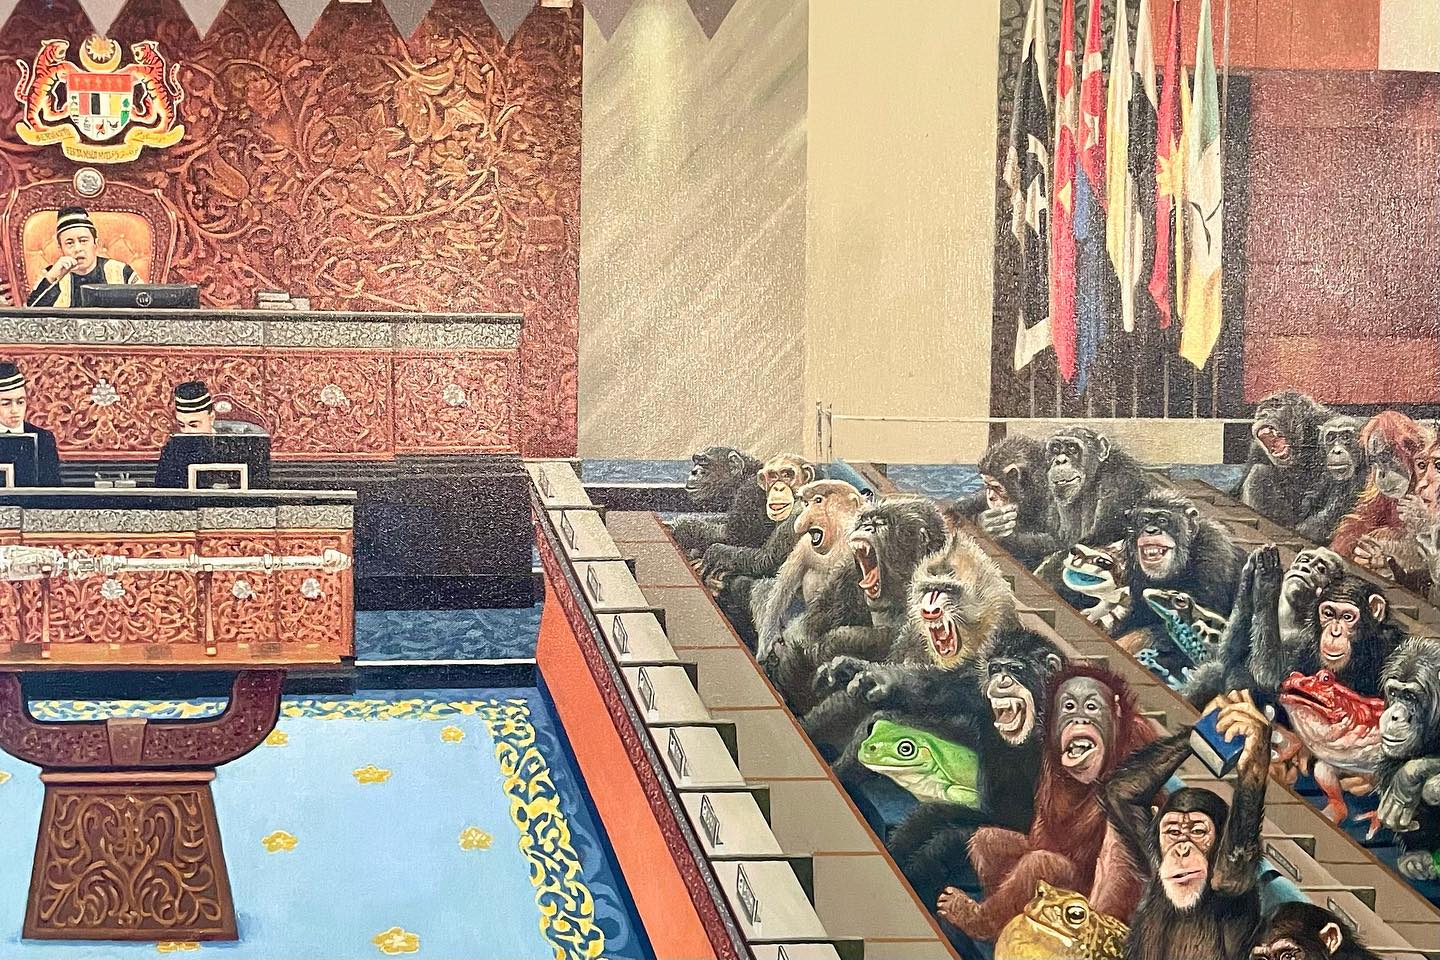 The Sultan of Selangor has acquired a painting depicting the Parliament filled with monkeys, chimpanzees, baboons and frogs. Source: Selangor Royal Office